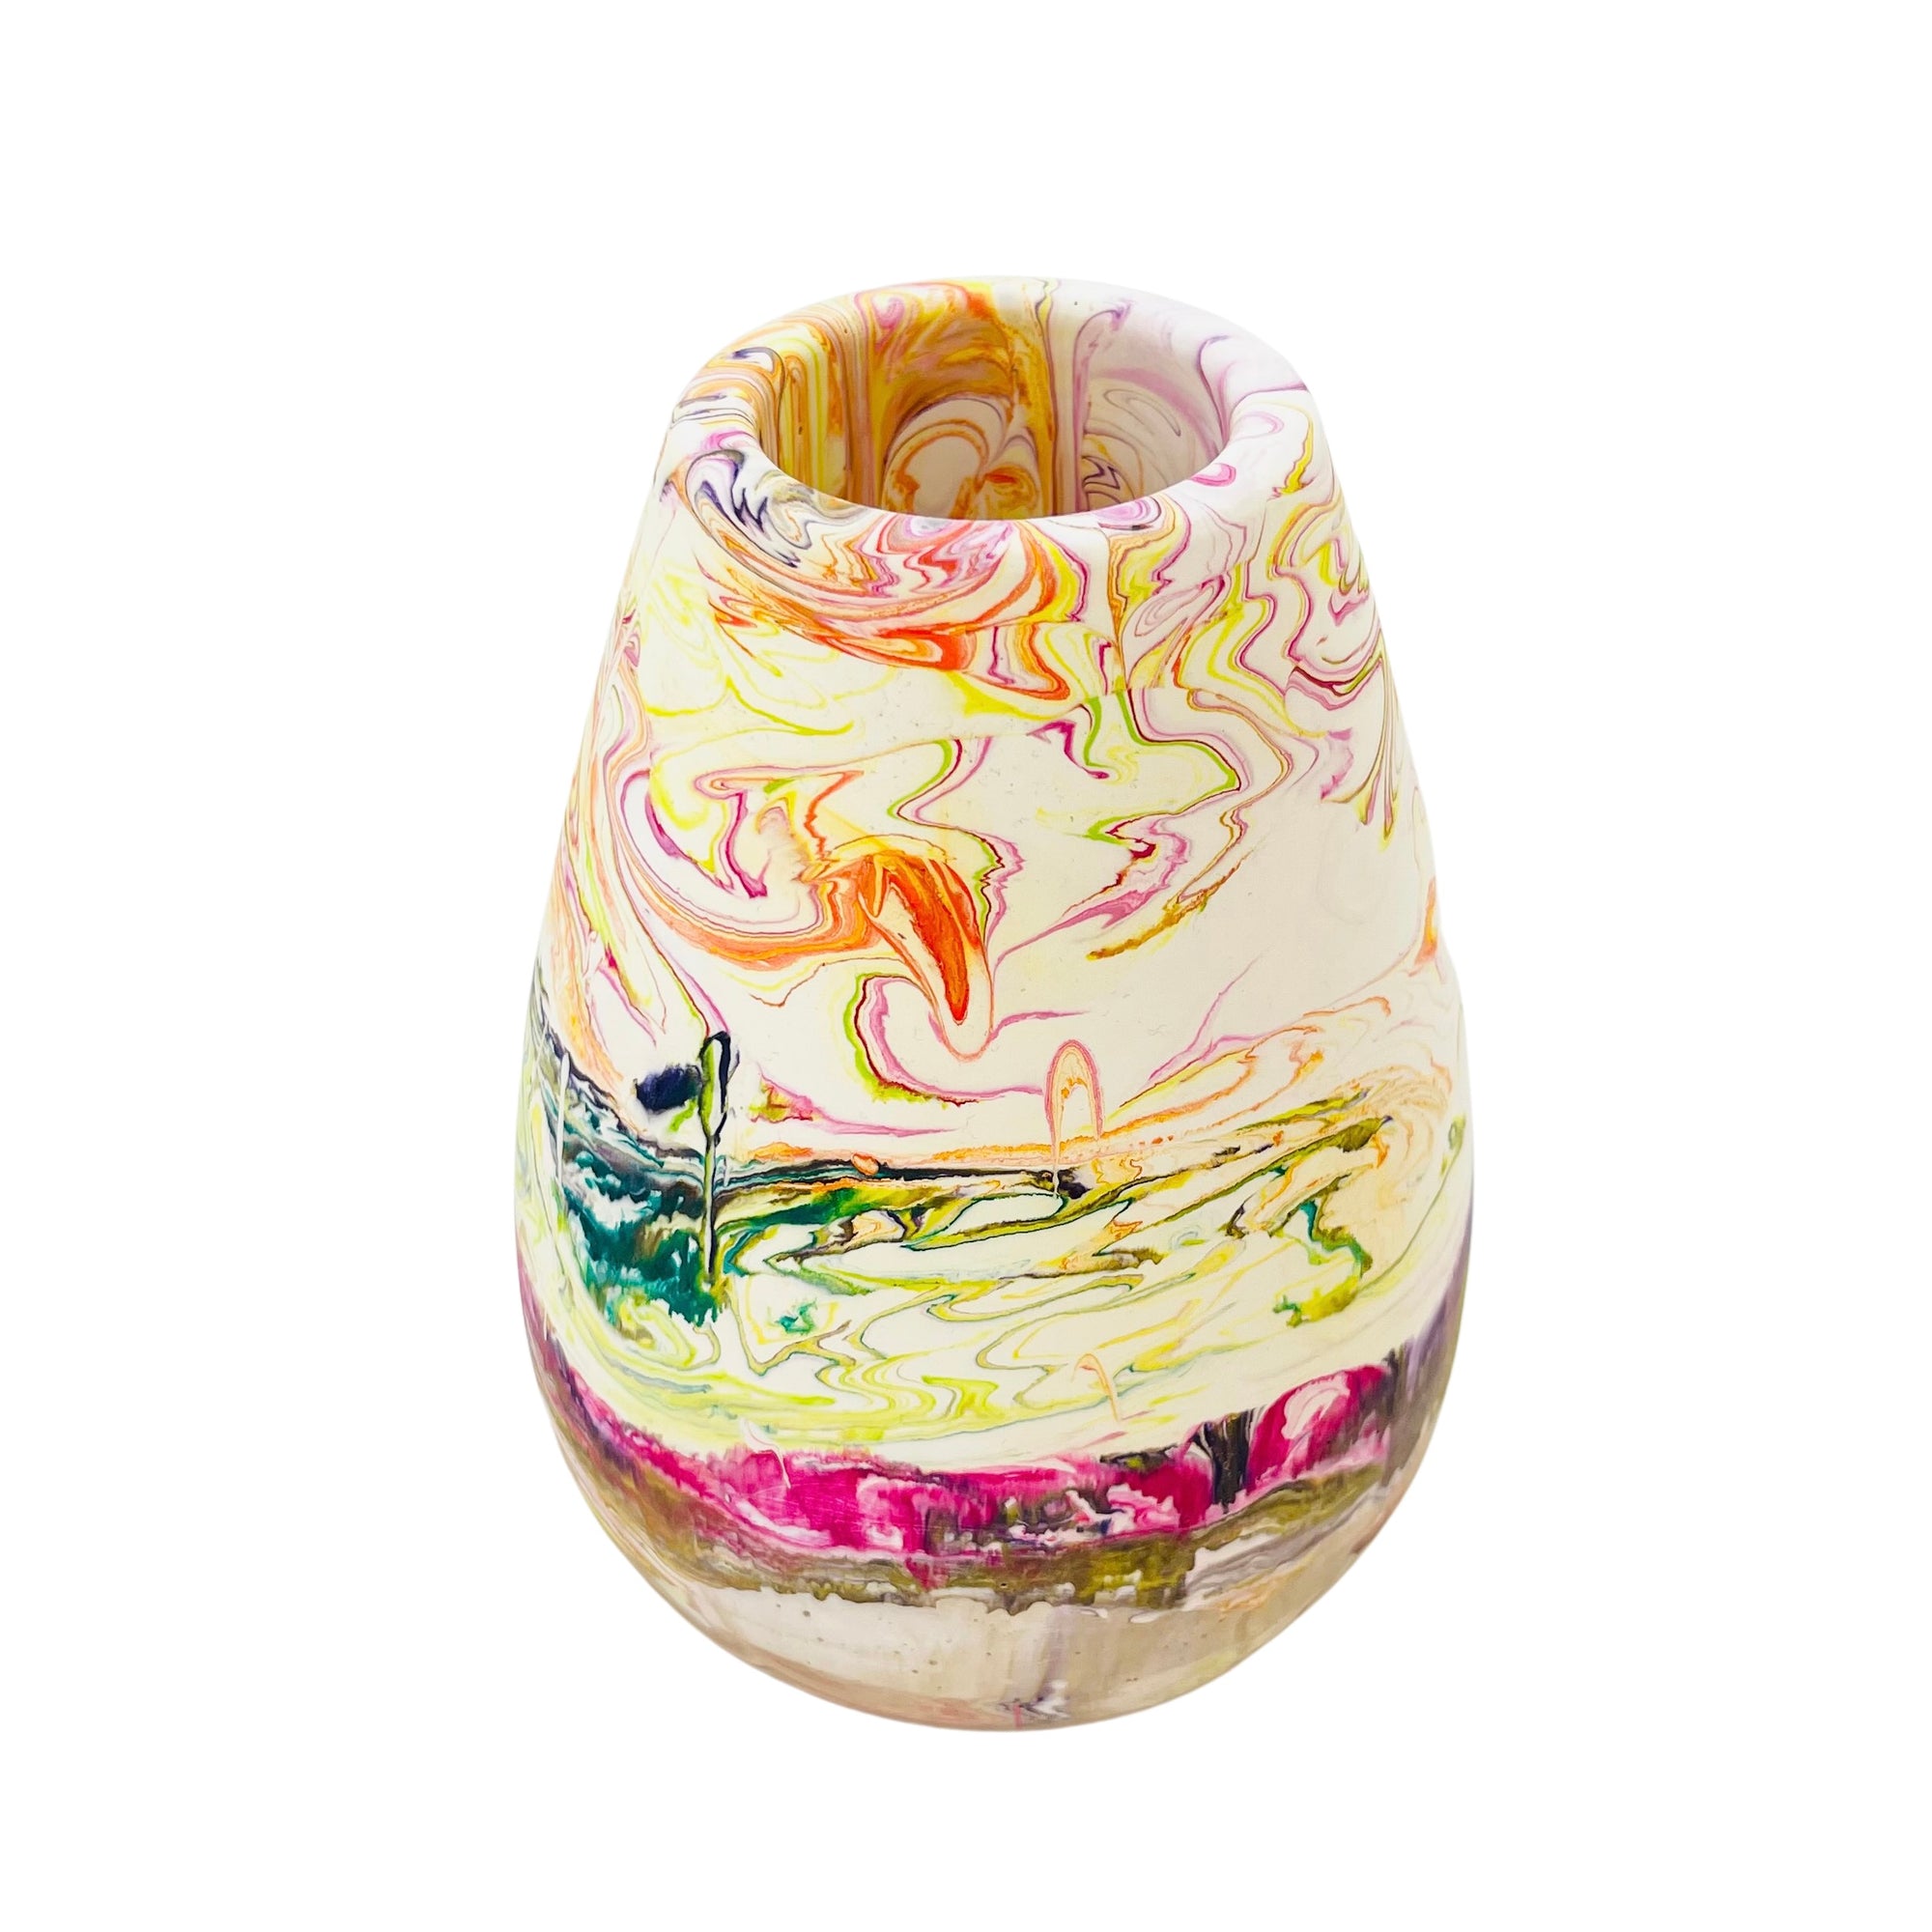 This heavy conical Jesmonite vase measures 11cm in diameter and 15cm height and is marbled with multicolour pigment.